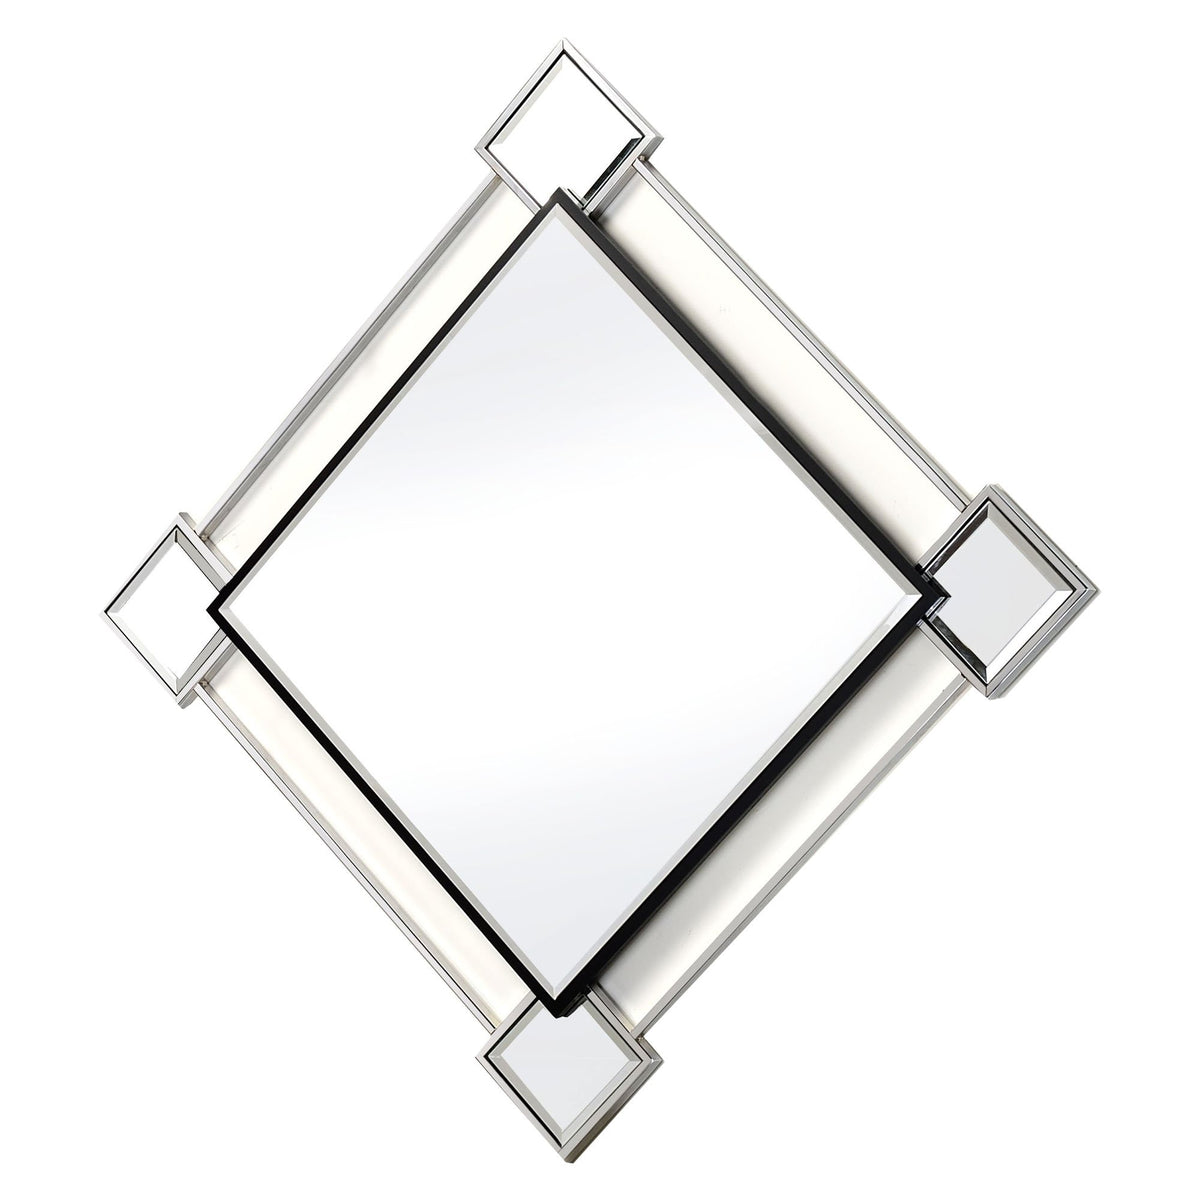 Diamond Shaped Beveled Accent Wall Mirror with Mirror Inserts, Silver - BM209637